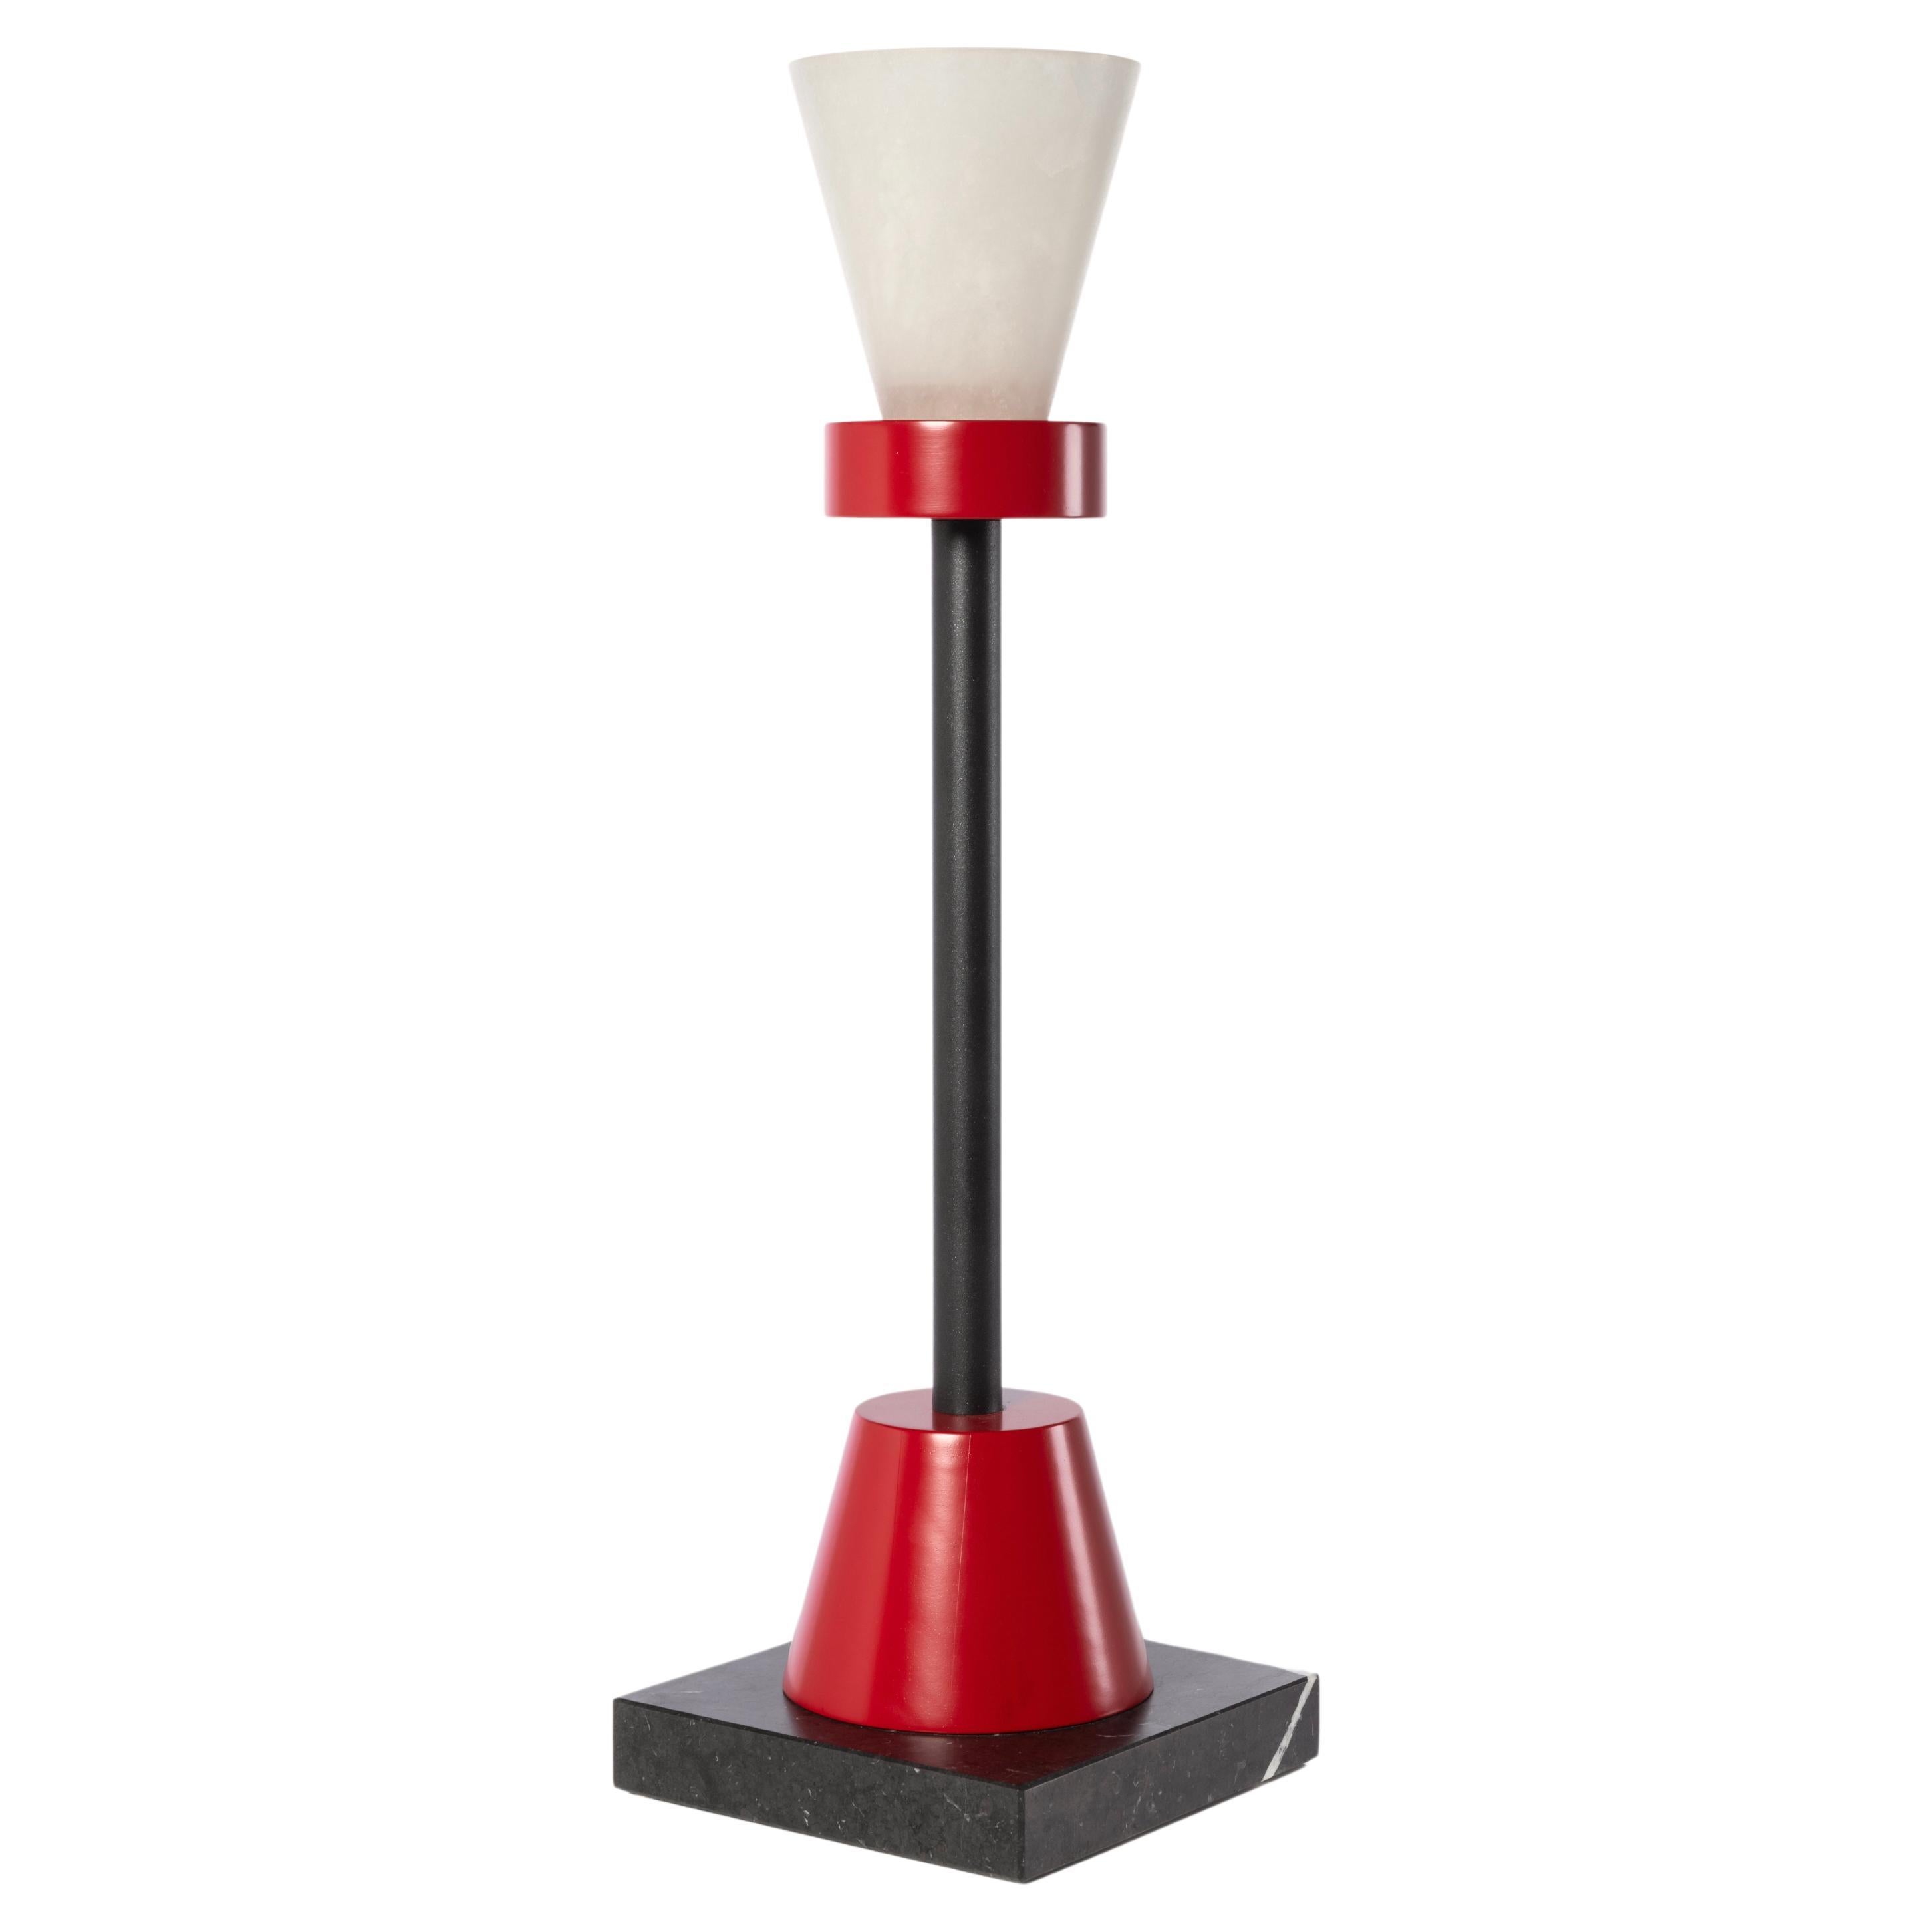 Ettore Sottsass (1917-2007) Lampe Luce Bassa 1988 Bharata collection For Sale